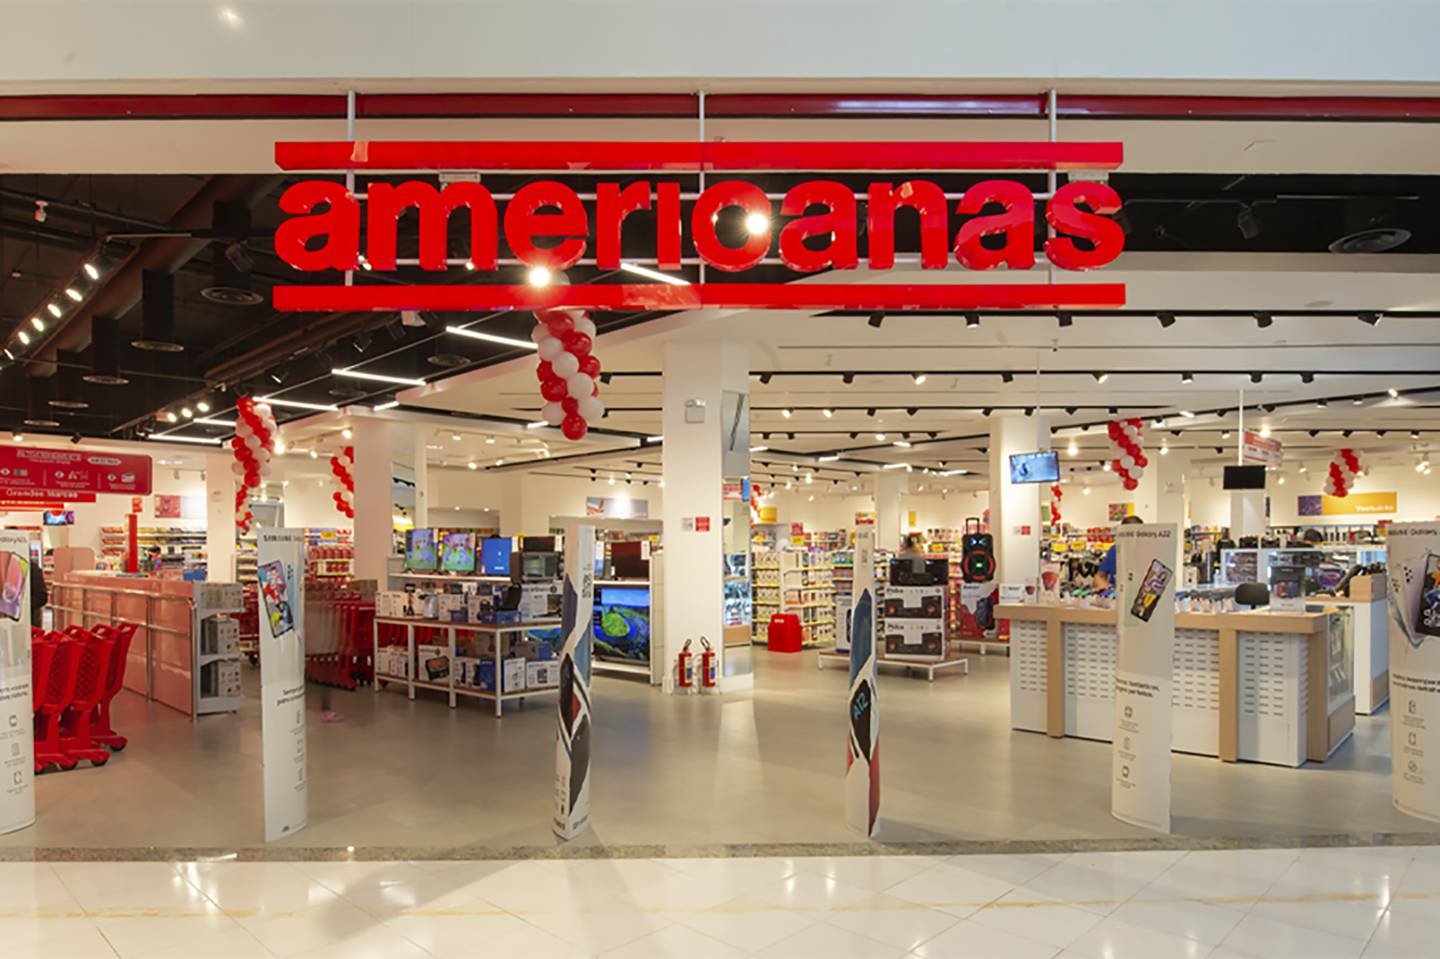 The main shareholders of beleageured Brazilian retail giant Americanas, Jorge Paulo Lemann, Marcel Telles and Carlos Alberto Sicupira, have raised the capitalization proposal for the company from 10 billion to 12 billion reais ($2.36 billion).